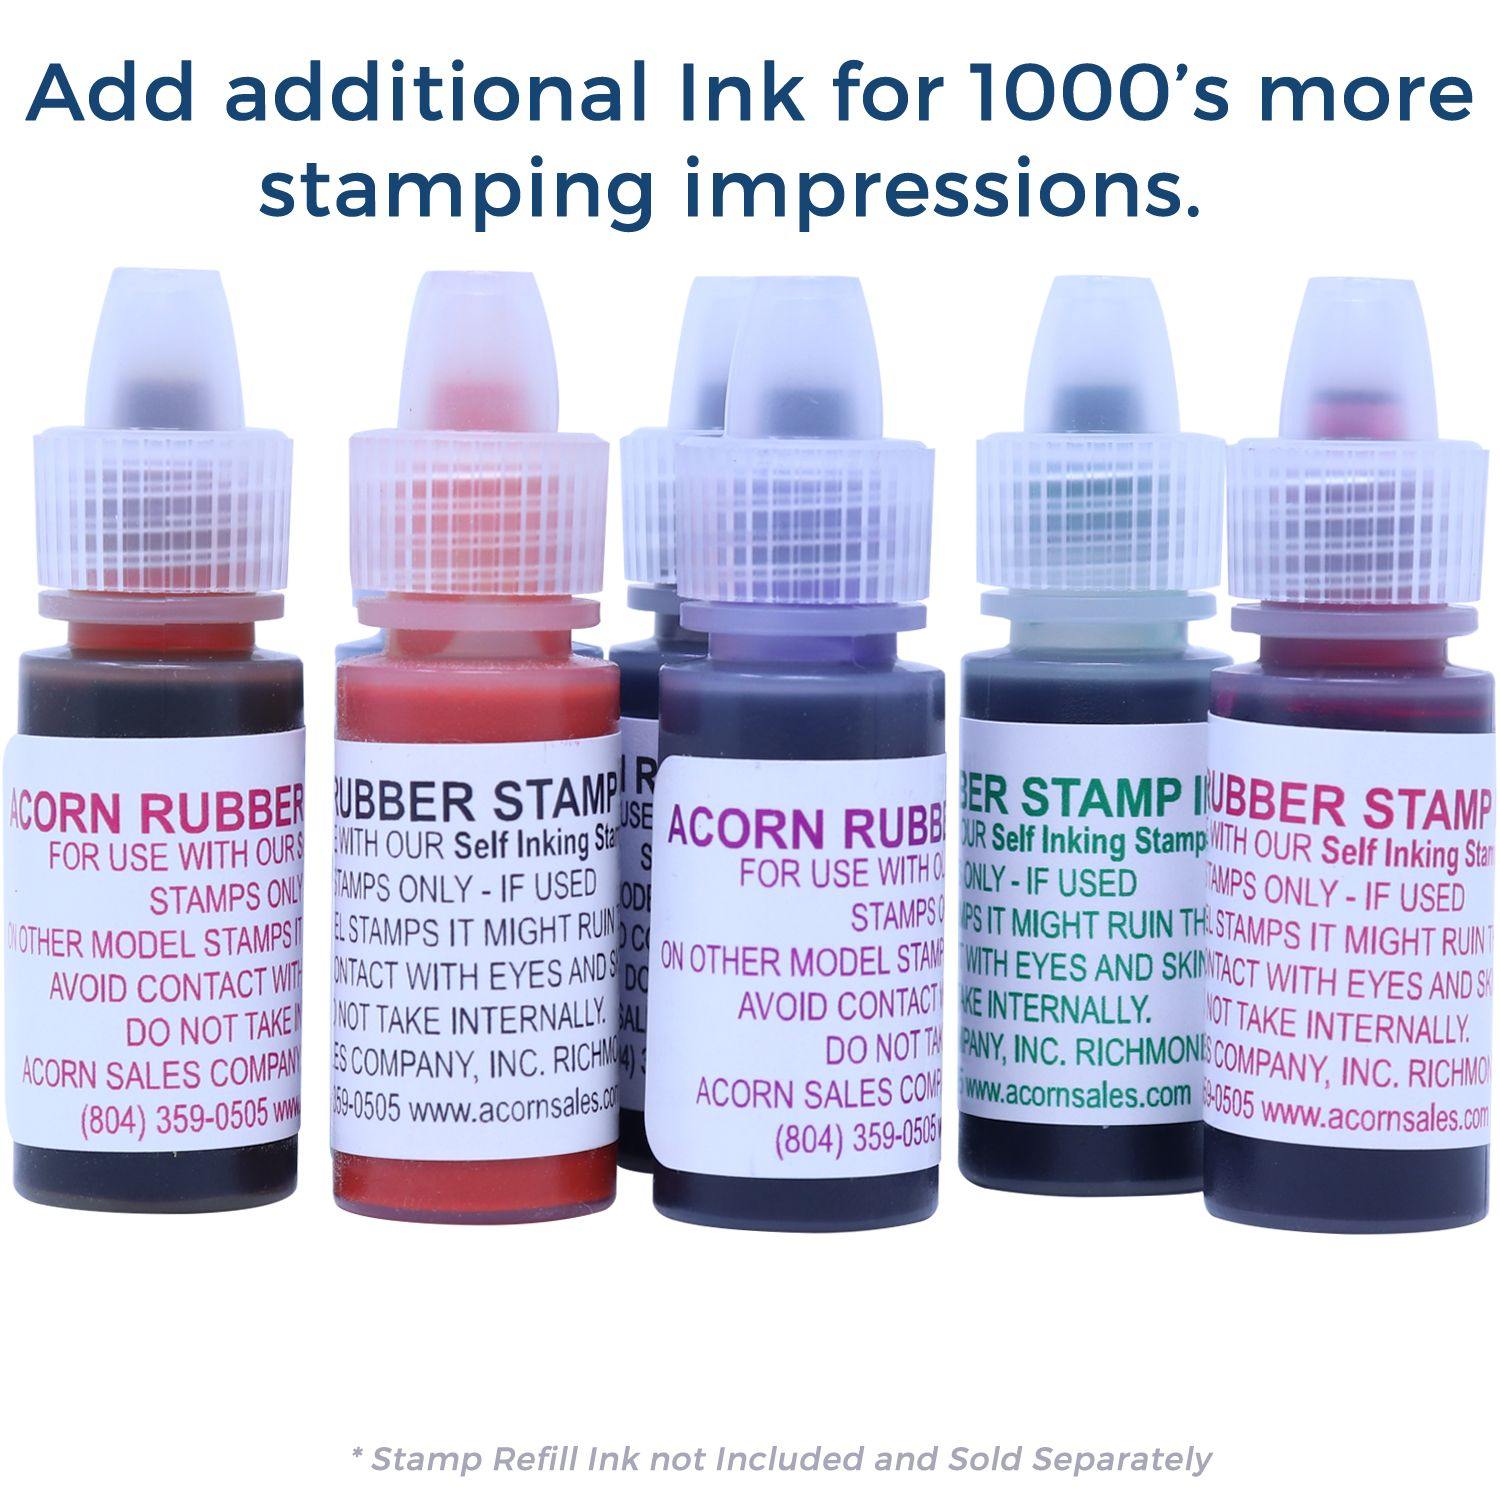 Rubber Stamp Refill Ink